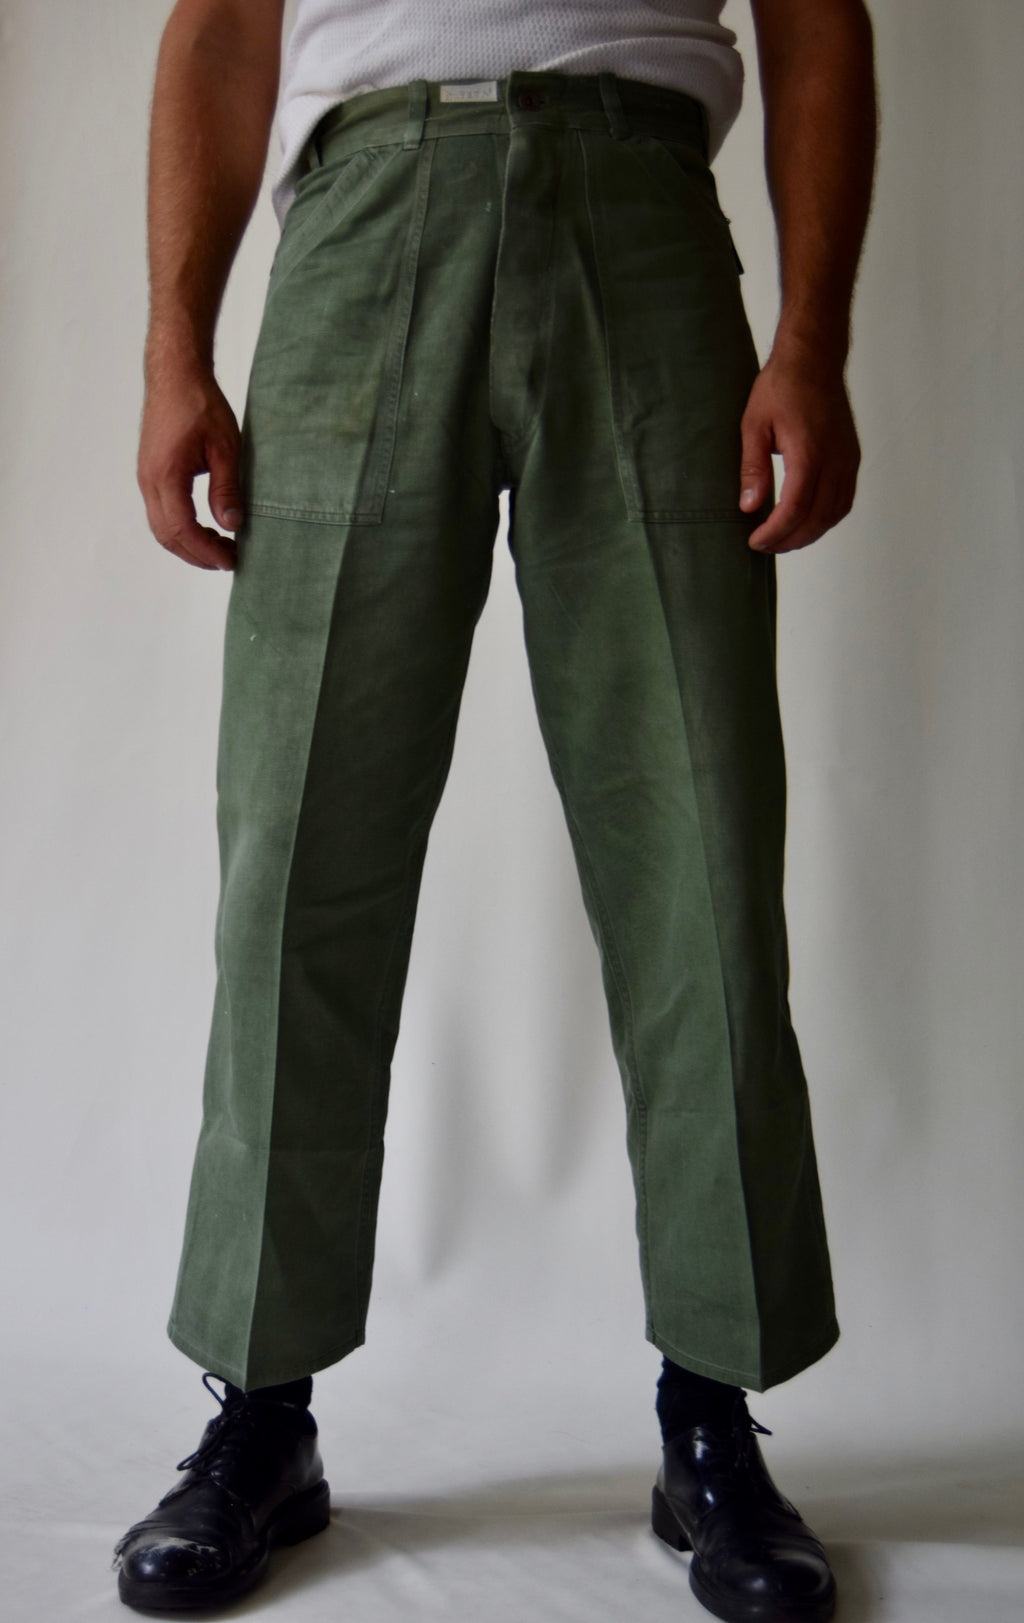 Men's 40's/50's Olive "Reeves" Trousers